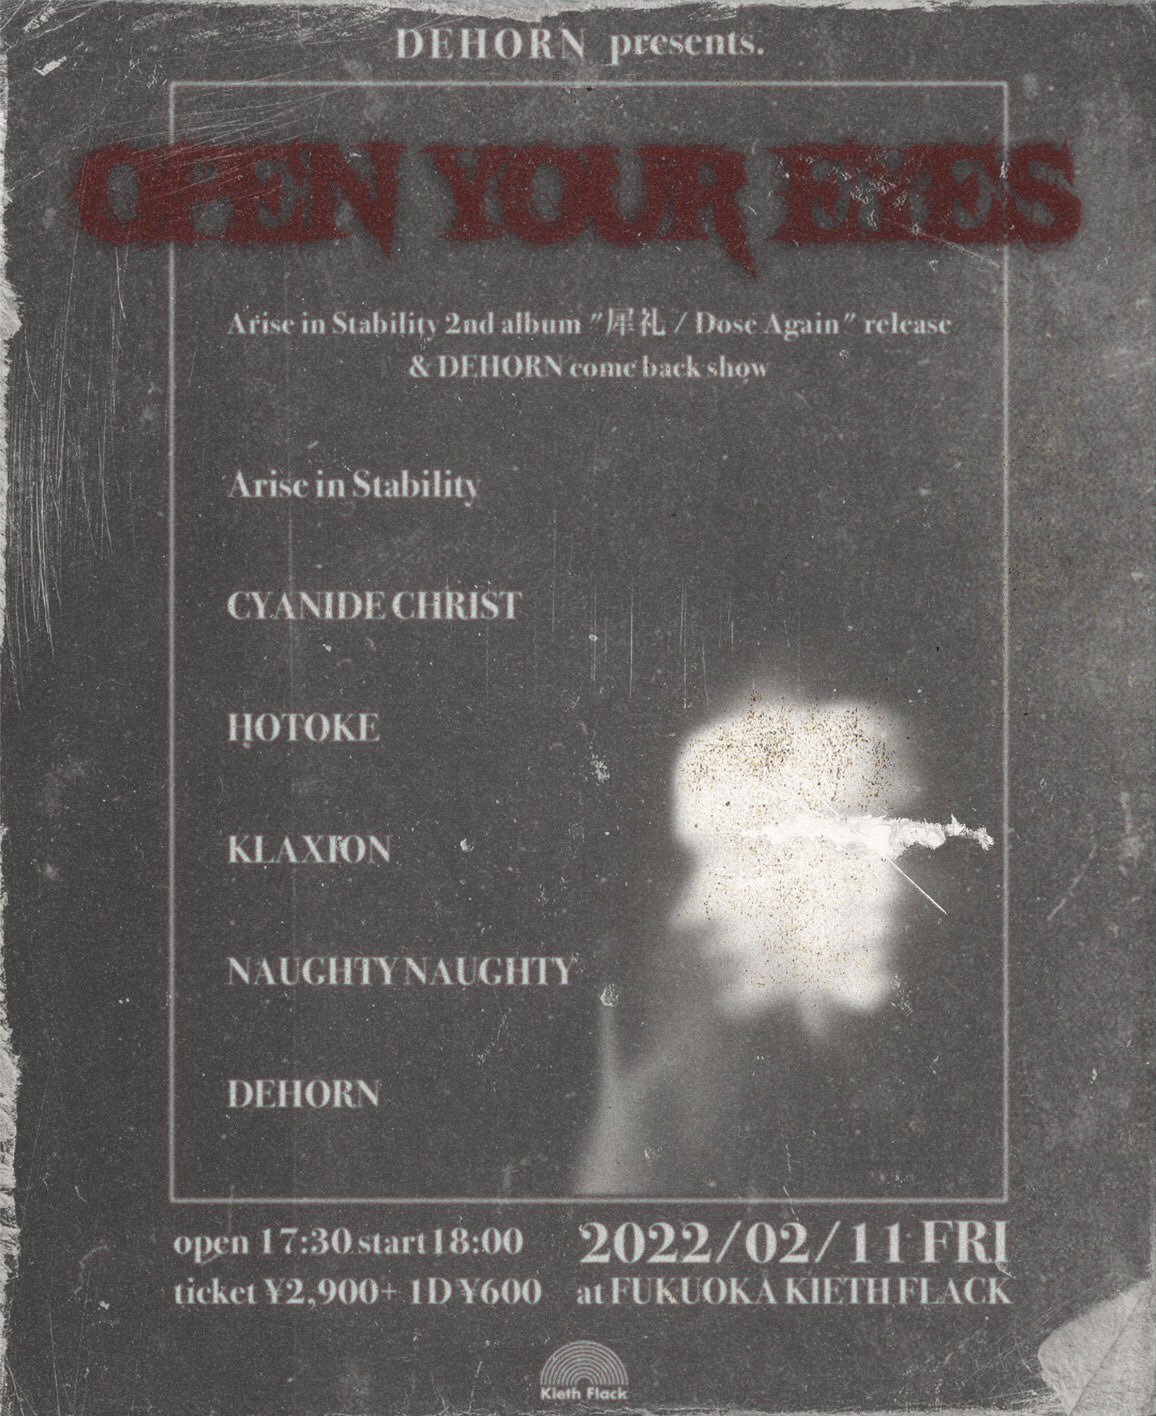 DEHORN come back show Arise in Stability 2nd album “犀礼 / Dose Again” release show